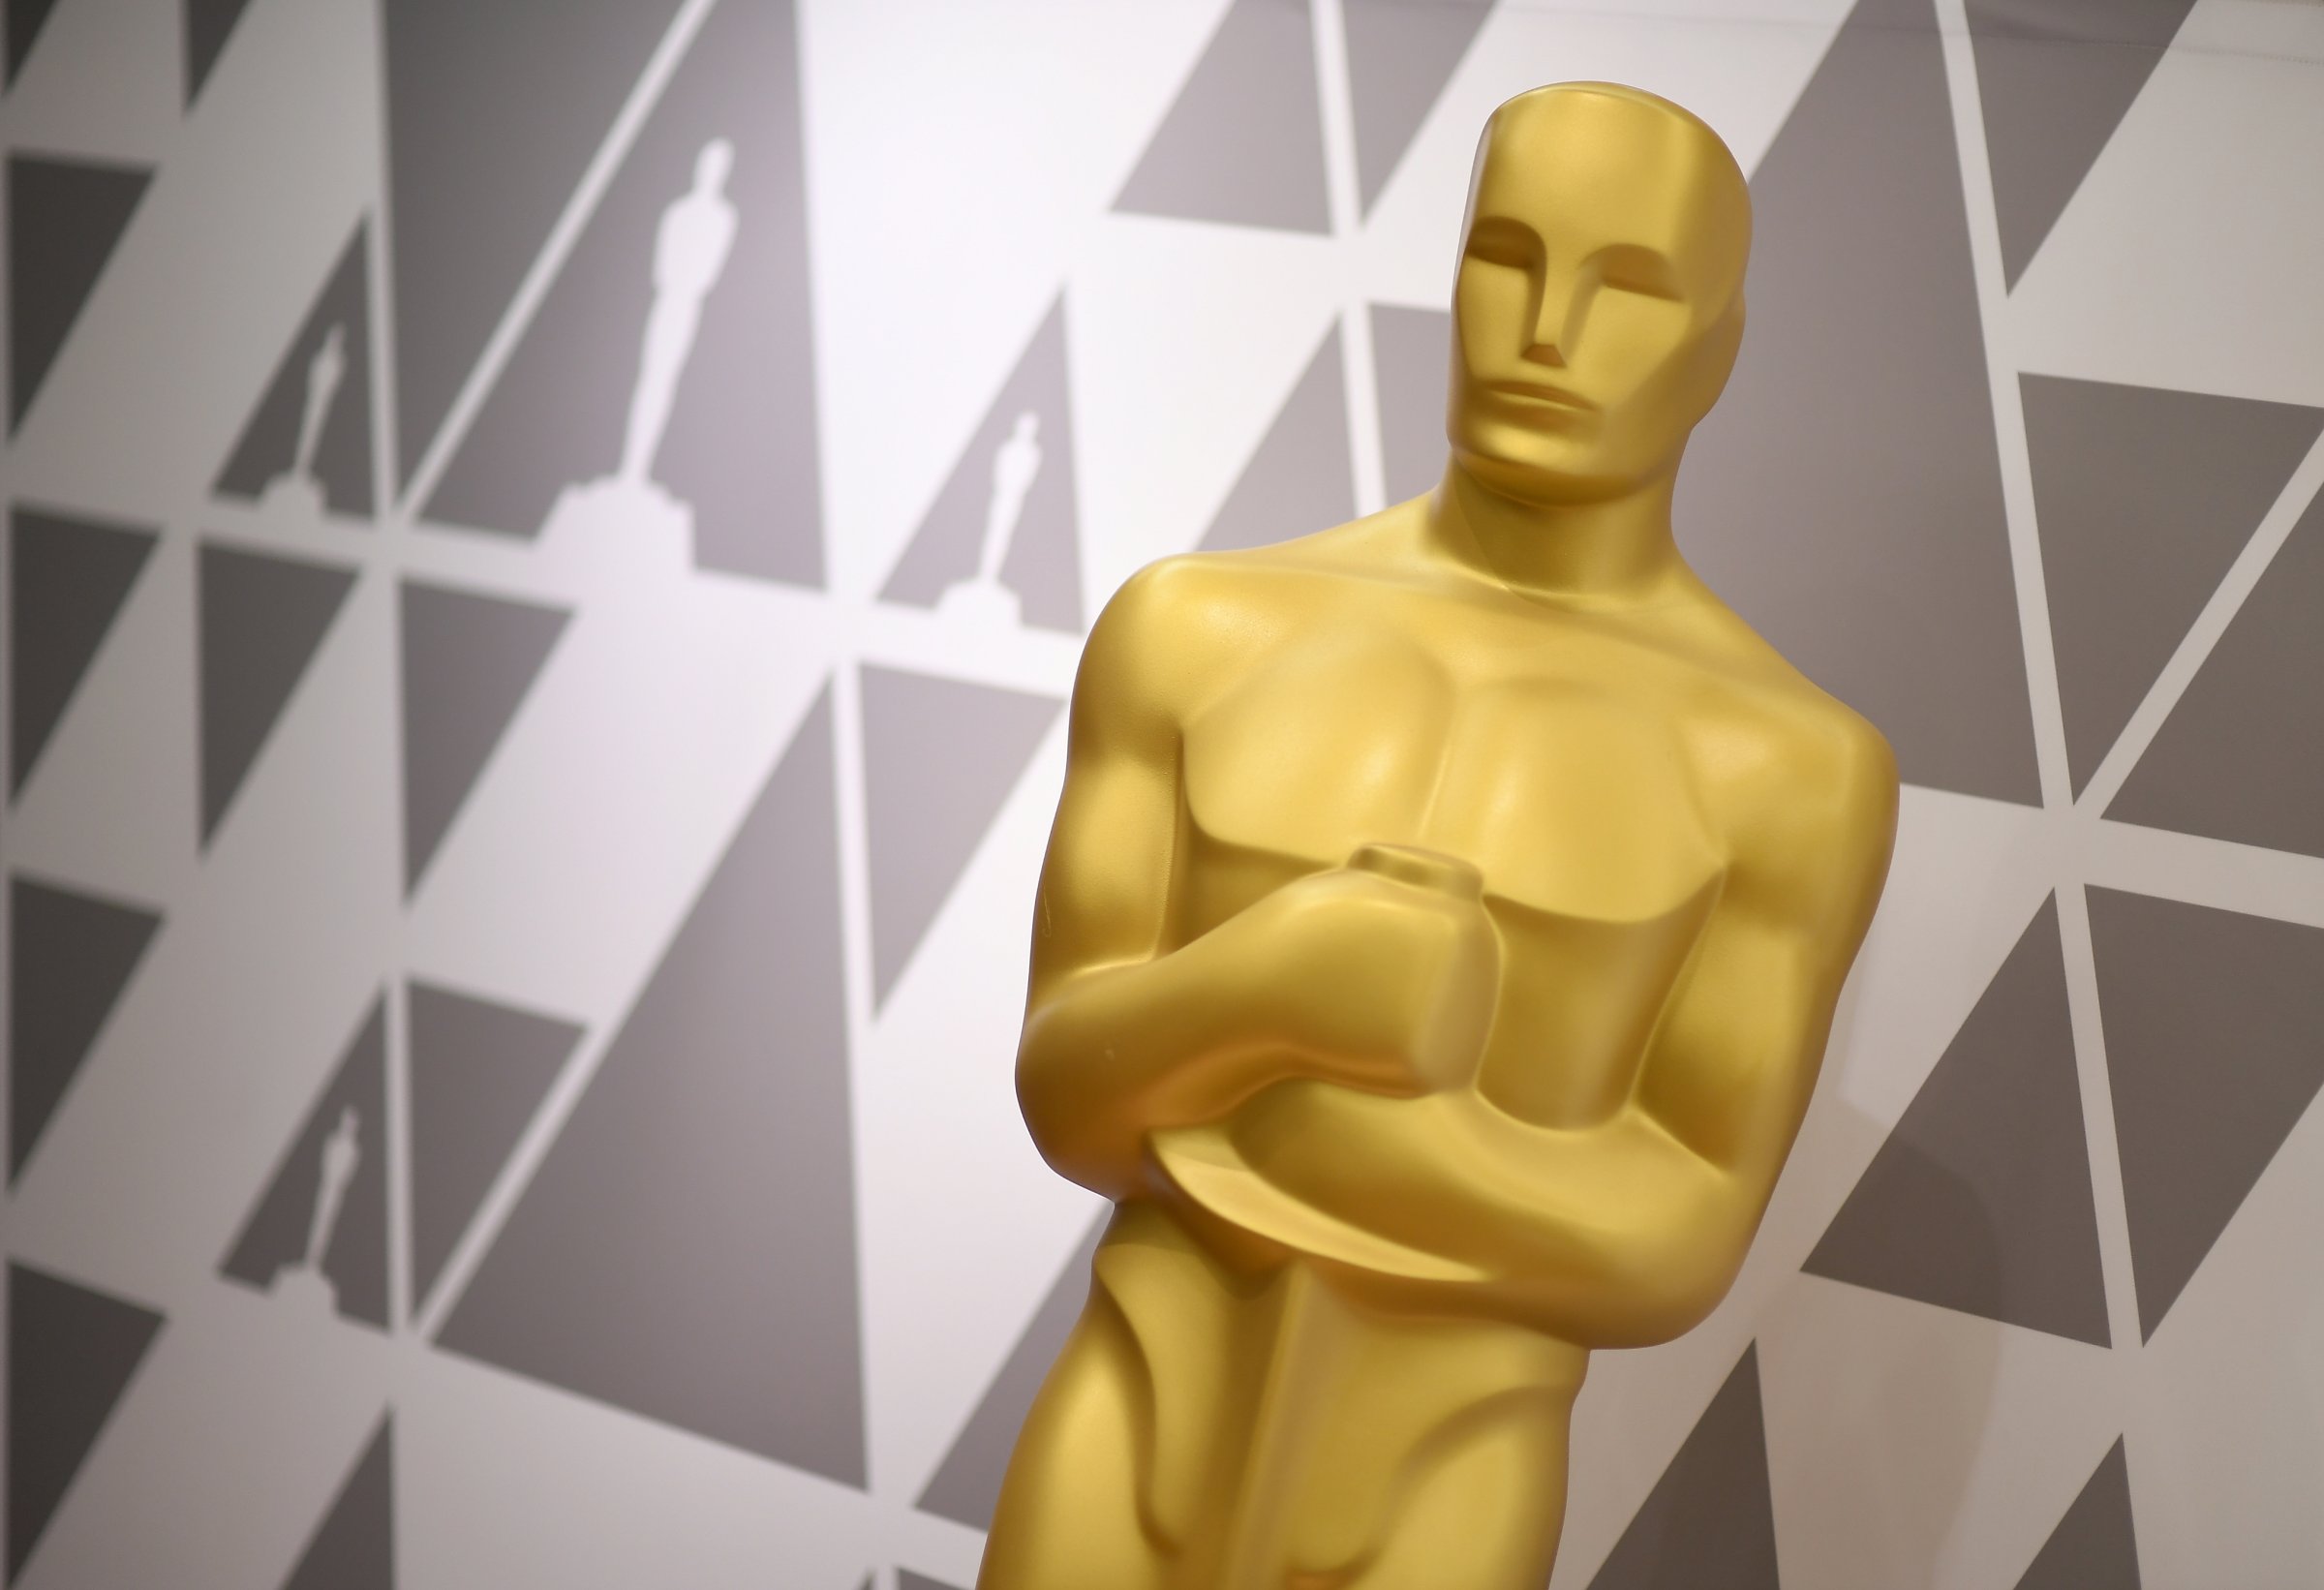 People have ideas on who should host the Oscars 2019